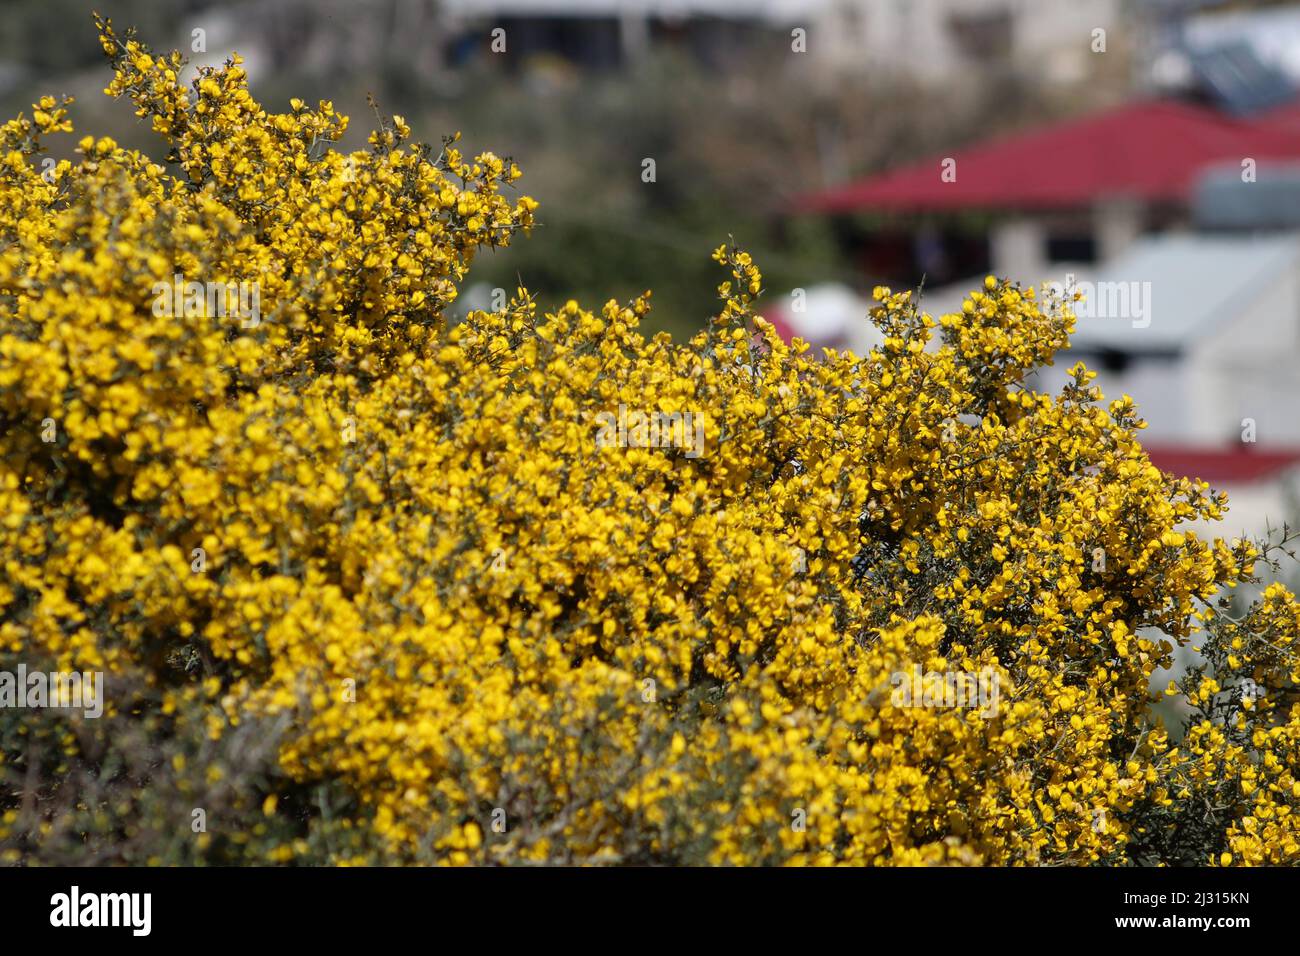 Yellow (scotch broom or cytisus scoparius) flower with blurred village view background. Selective focus. Stock Photo